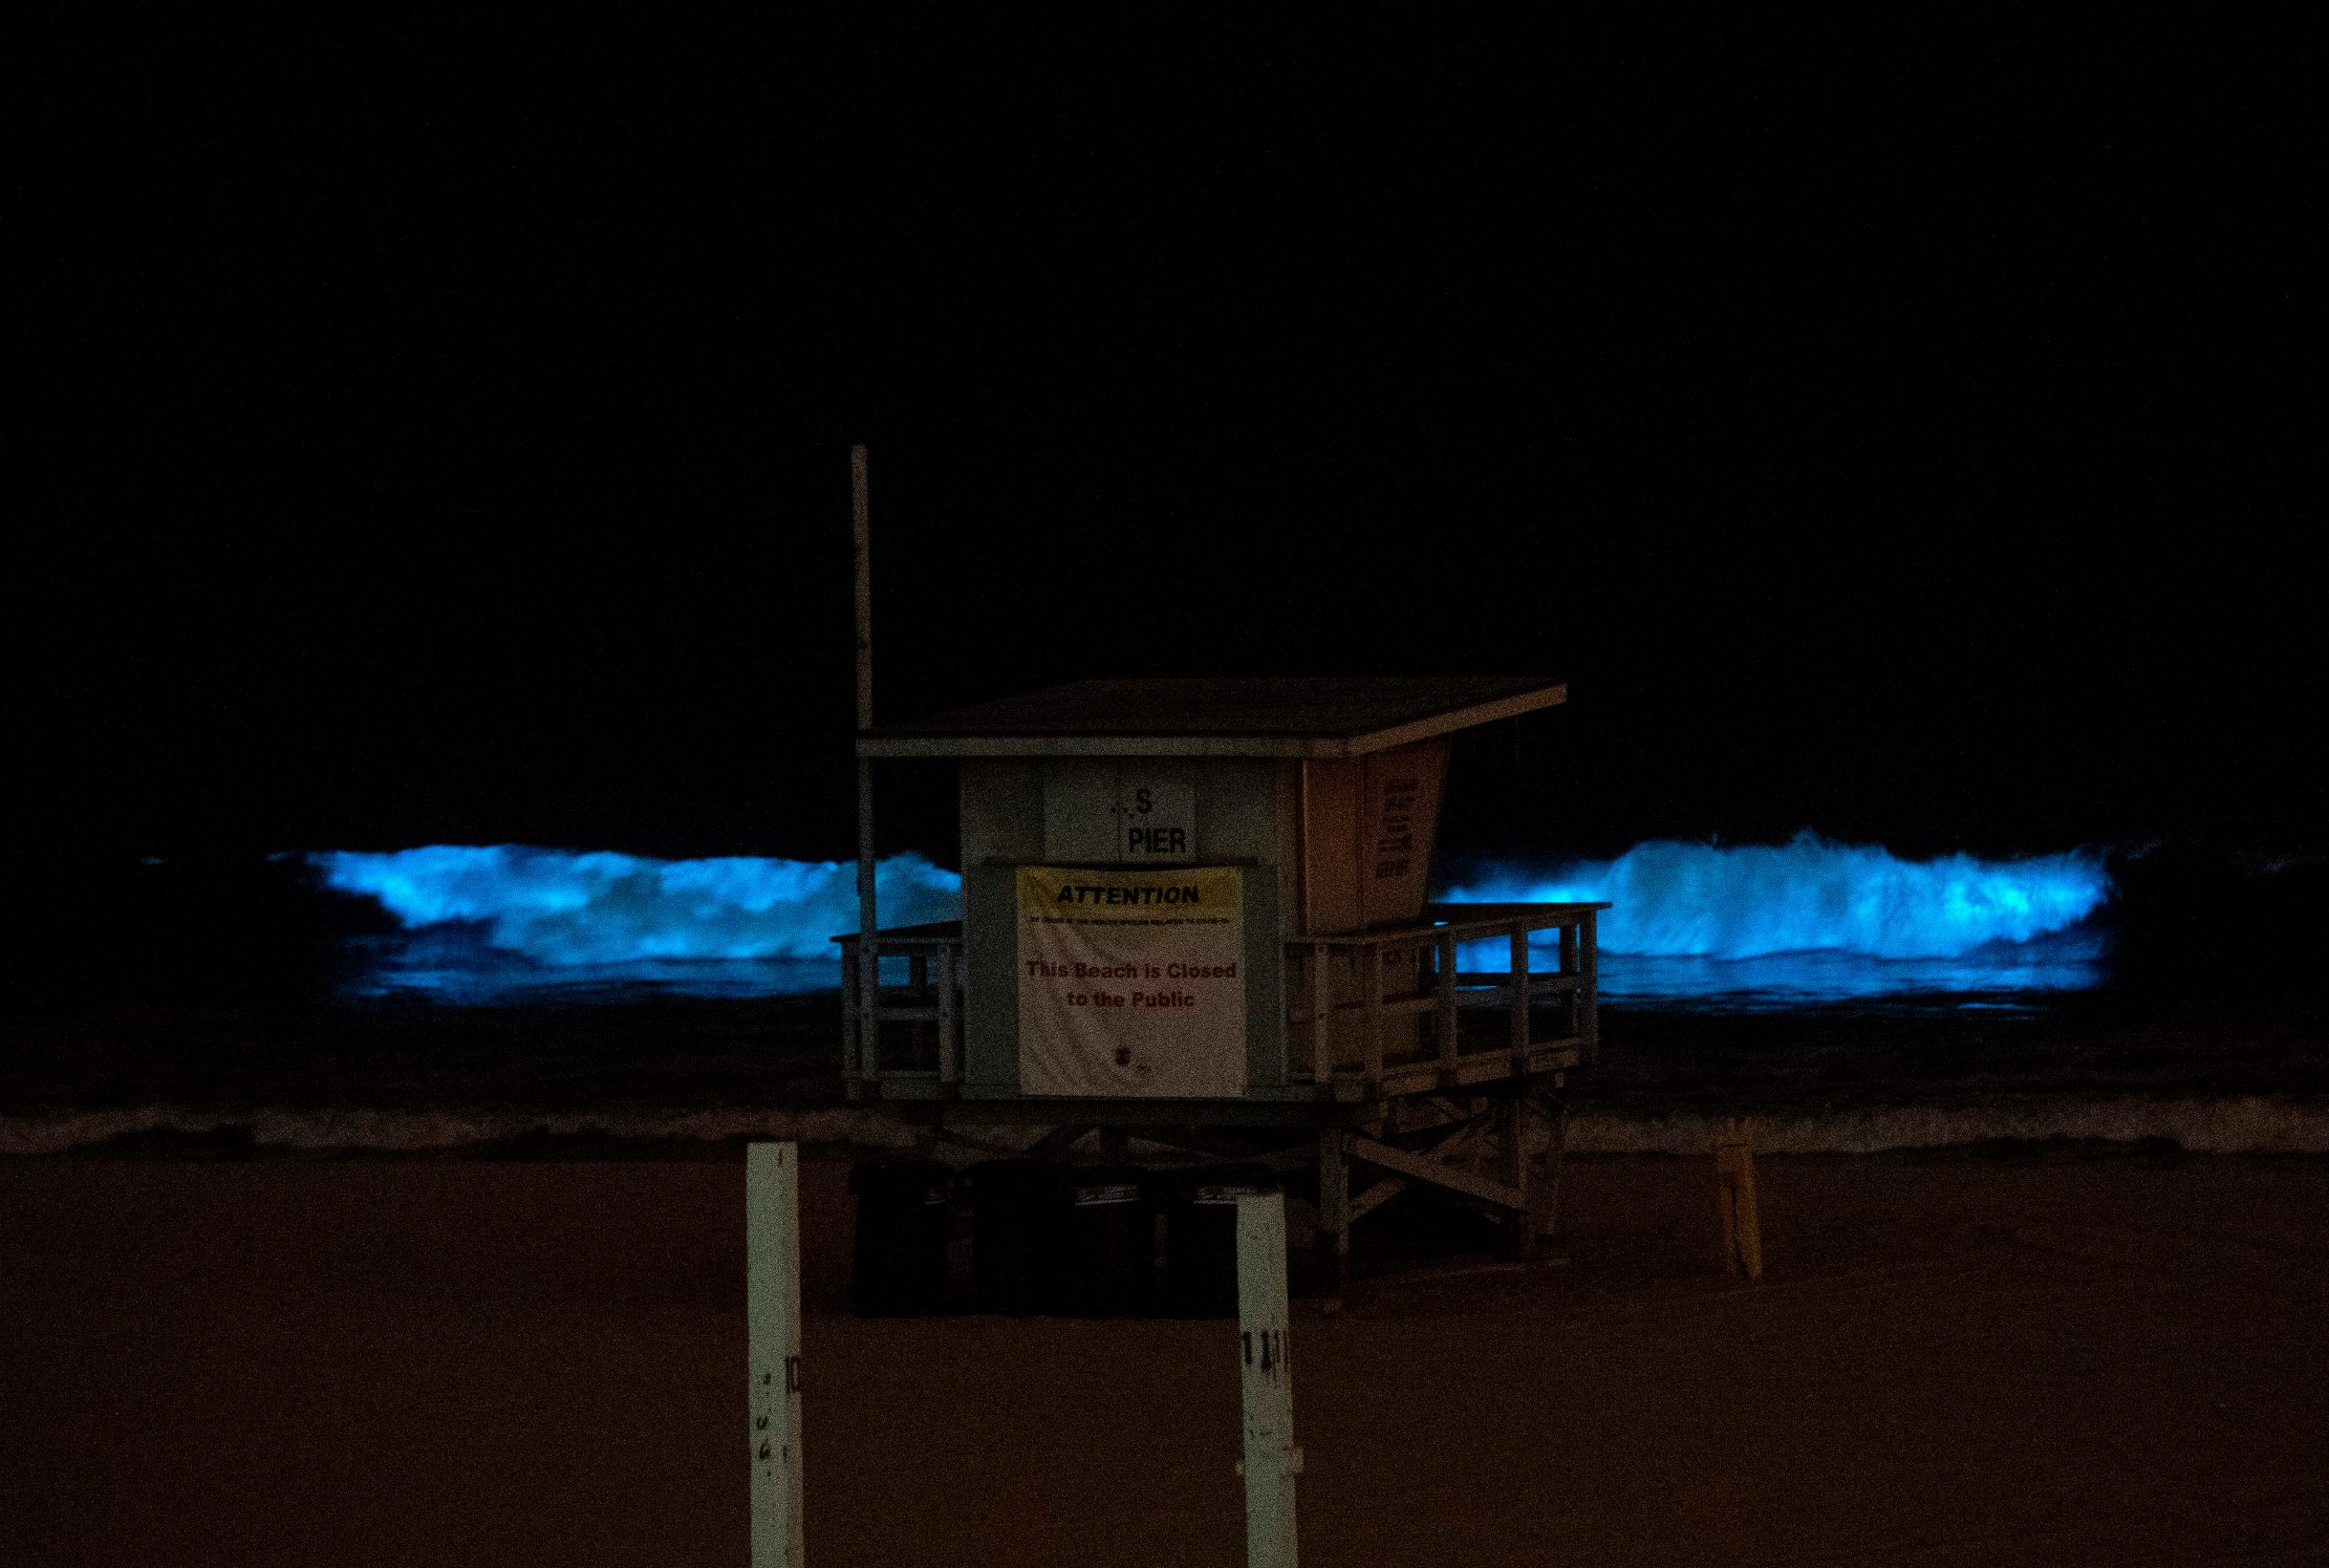 A lifeguard tower is seen as bioluminescent waves crash on the sand, shining with a blue glow on April 28, 2020, in Manhattan Beach, California. - Bioluminescence is a phenomenon caused by certain kinds of phytoplankton associated with red tide that by night generate a pulse of blue light as the waves crash. (Photo by VALERIE MACON / AFP)